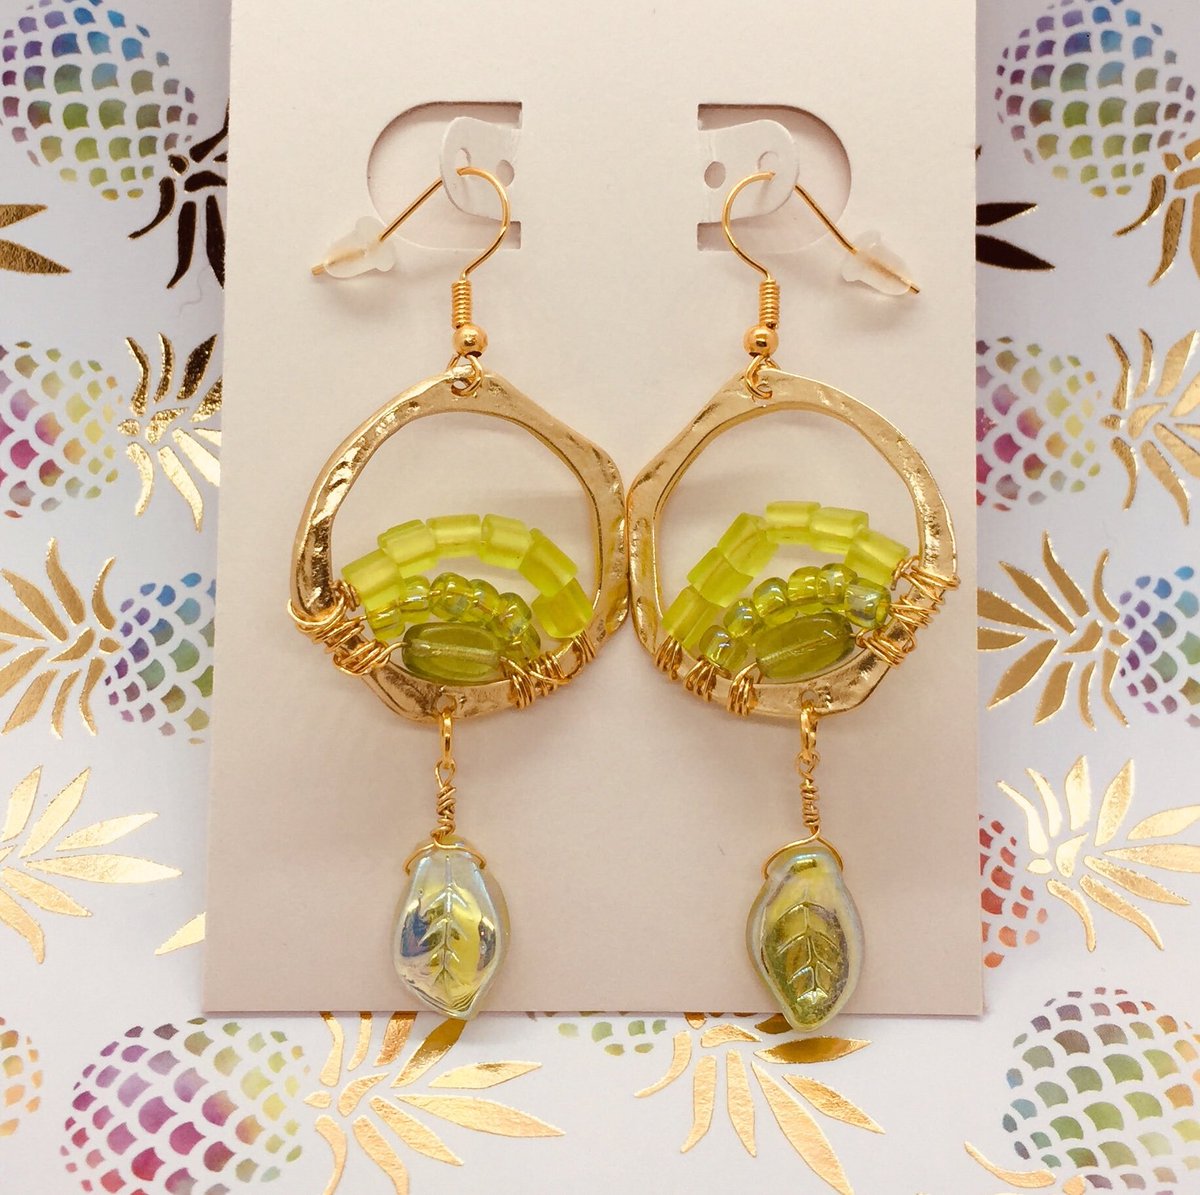 Excited to share the latest addition to my #etsy shop: Yellow/Green Leaf Dangle earrings Gold Hoops - Beaded Jewelry hoops - Nature inspired jewelry - #chunkygold #chunkygoldjewelry etsy.me/3xNoQaa